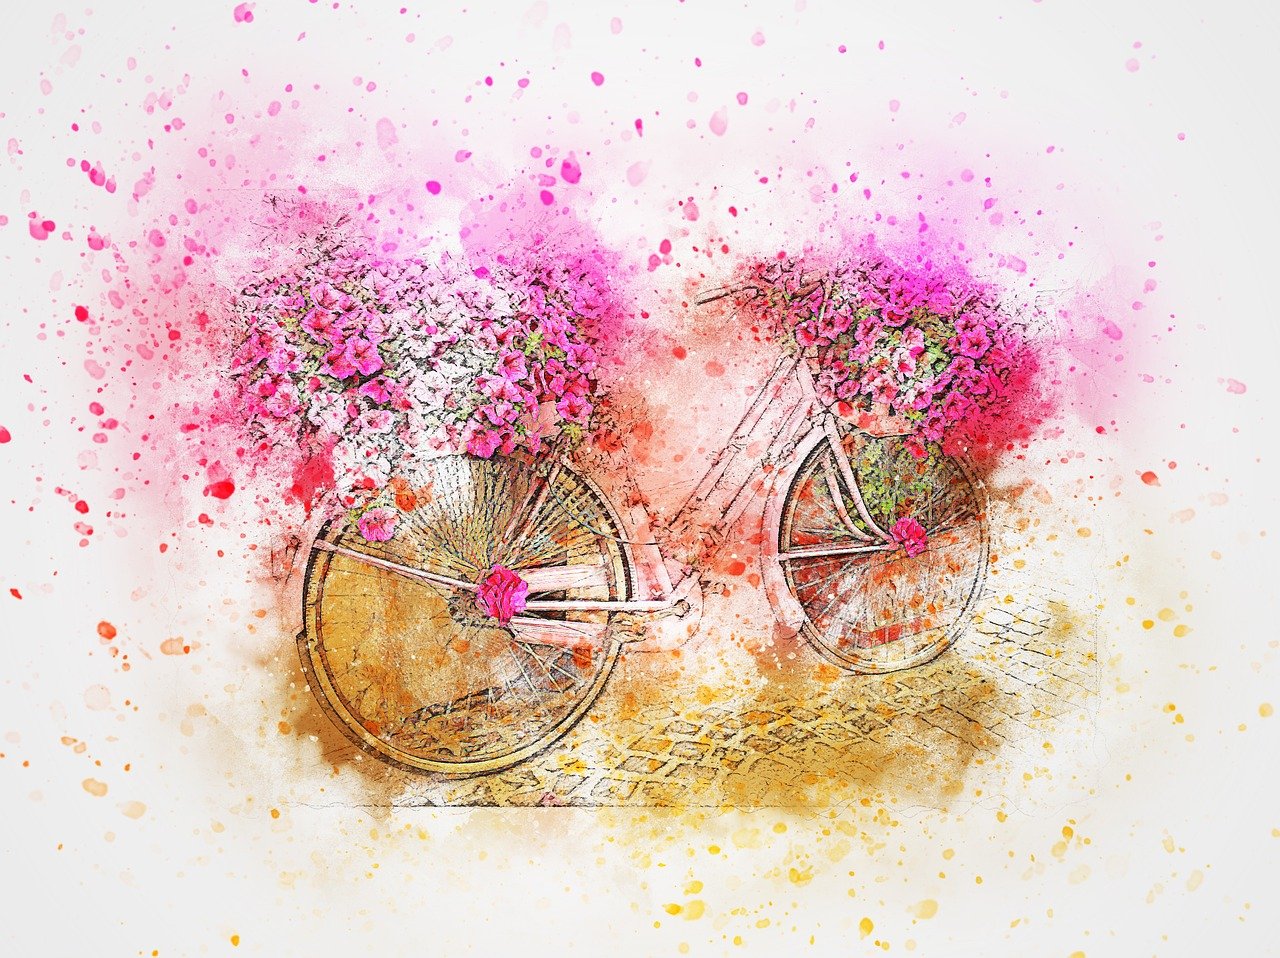 a painting of a bicycle with flowers in the basket, a watercolor painting, modern european ink painting, digital painting style, flowers exploding and spraying, verbena, photoshop brush